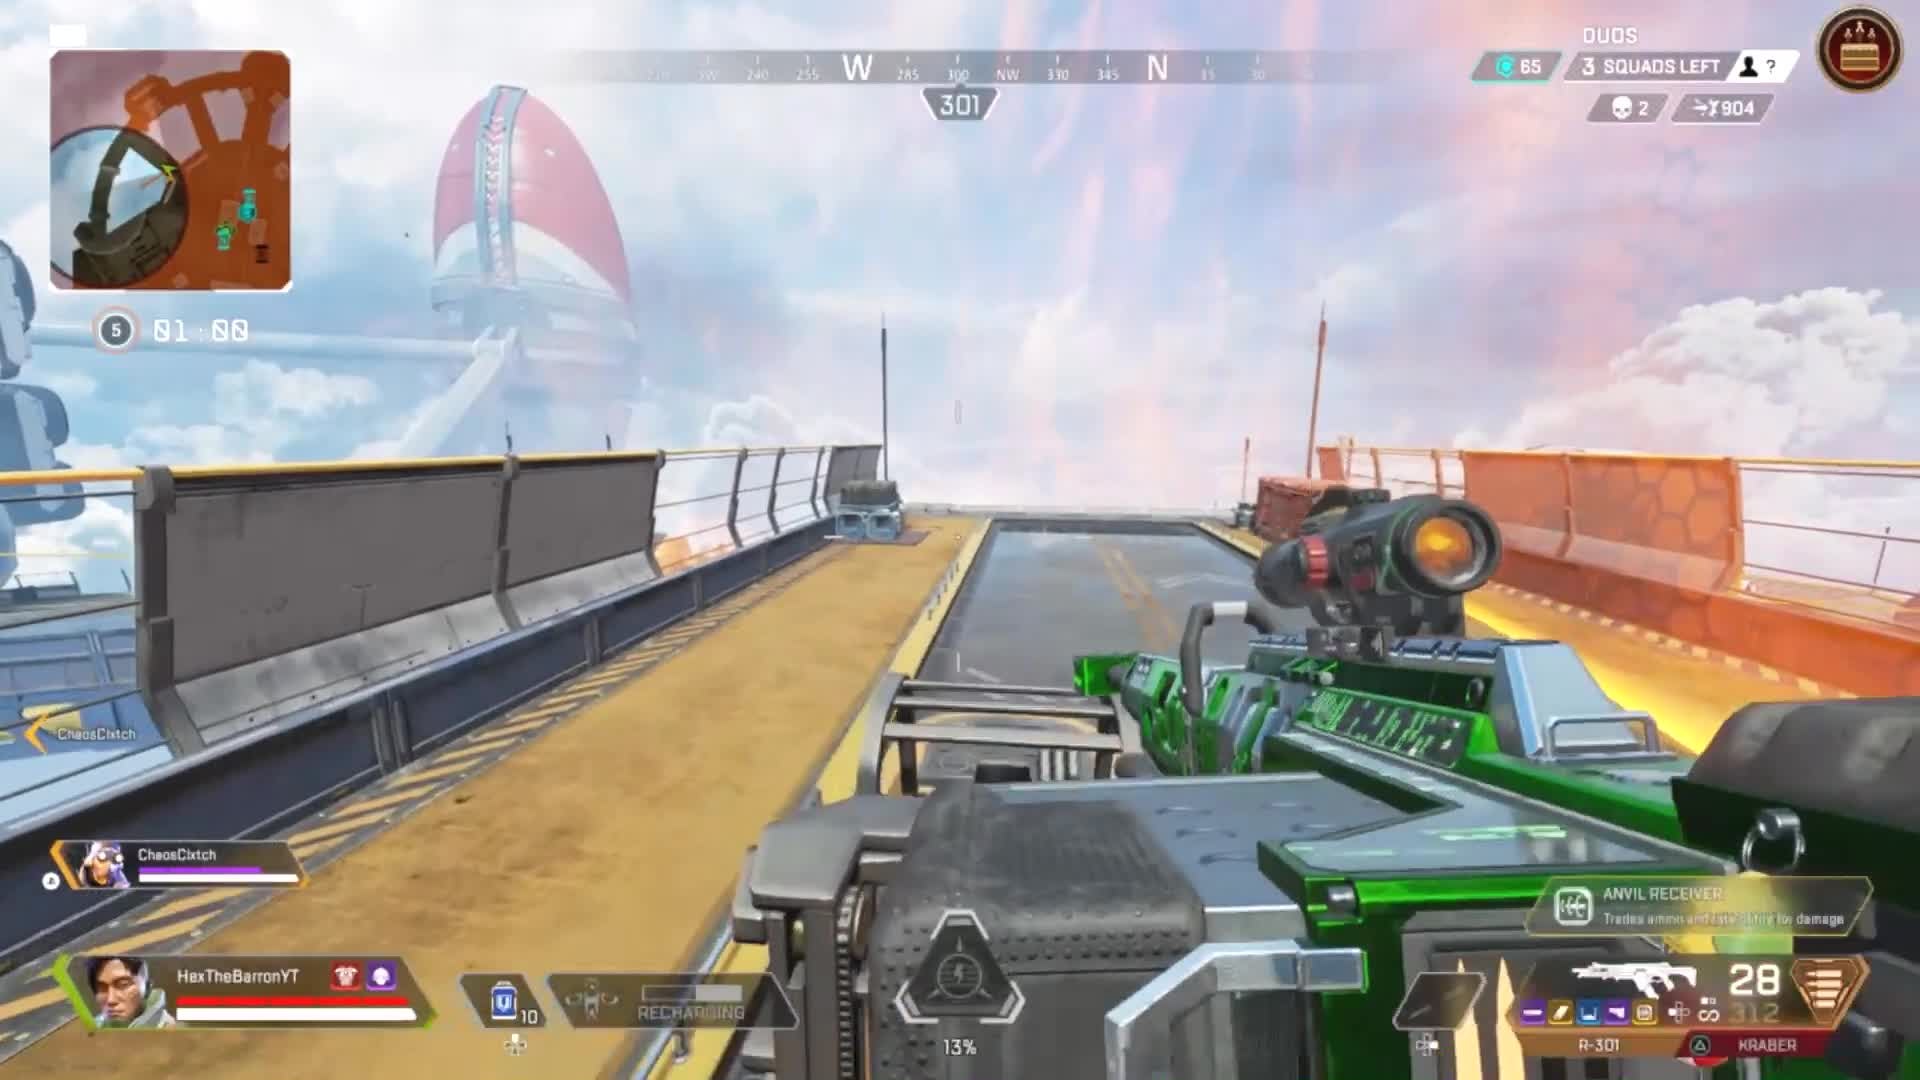 Apex Legends: General - The Kraber Shot That Mattered Baby!  video cover image 0